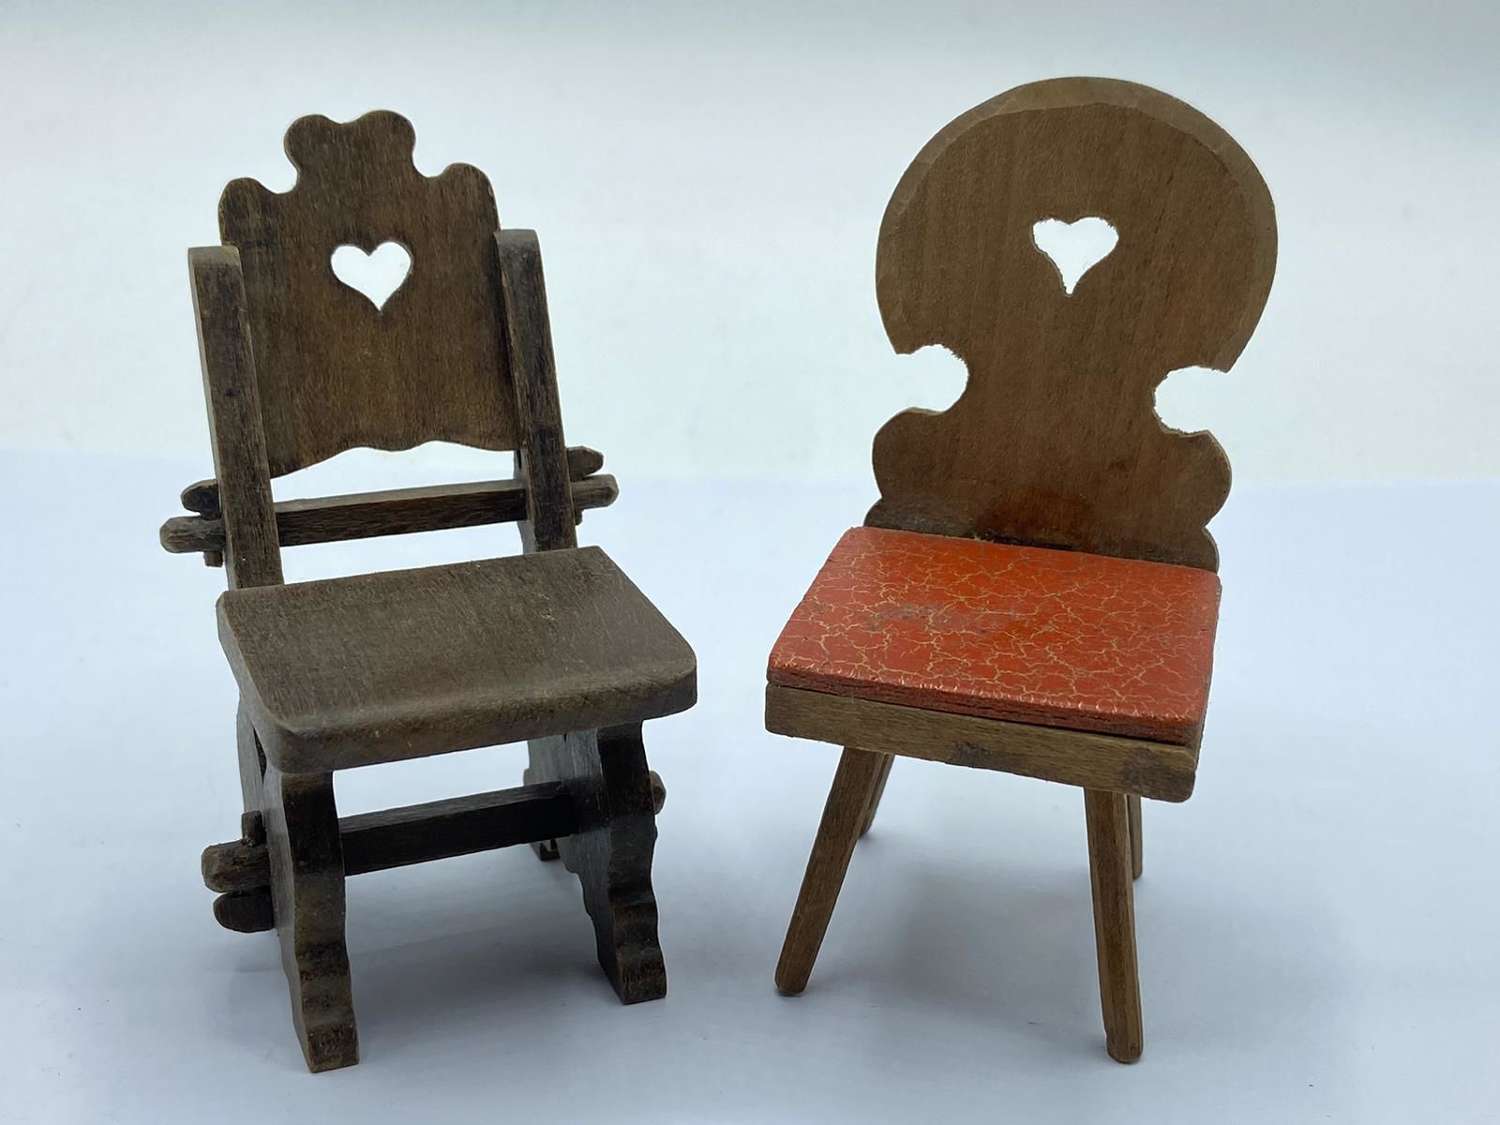 Vintage 1970s Wooden Dolls House Different Style Of Chairs